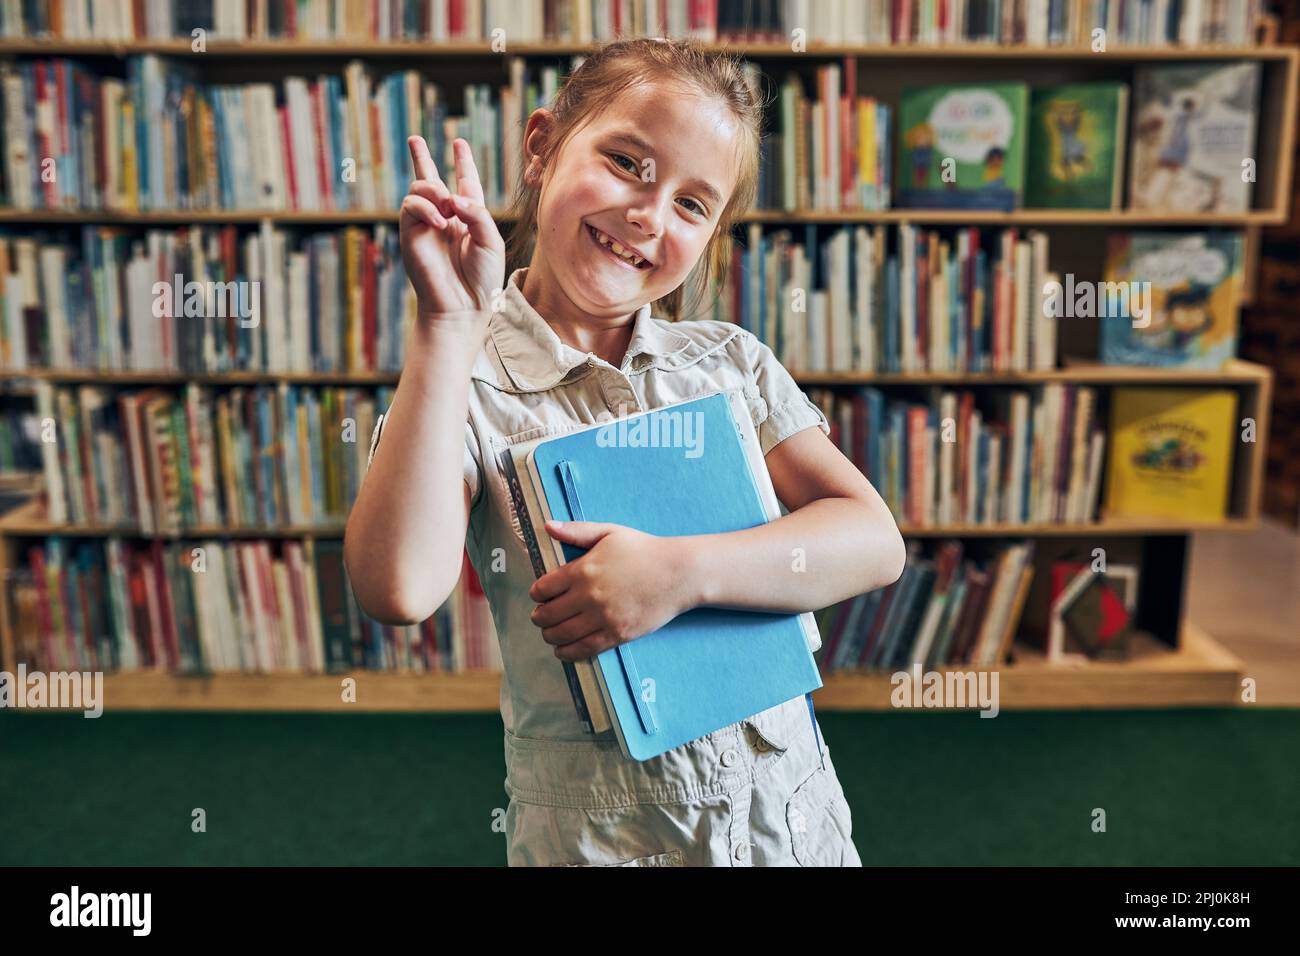 Back to school. Happy little girl at school again. Smiling student making V sign hand gesture holding books standing at front of bookshelf with books Stock Photo